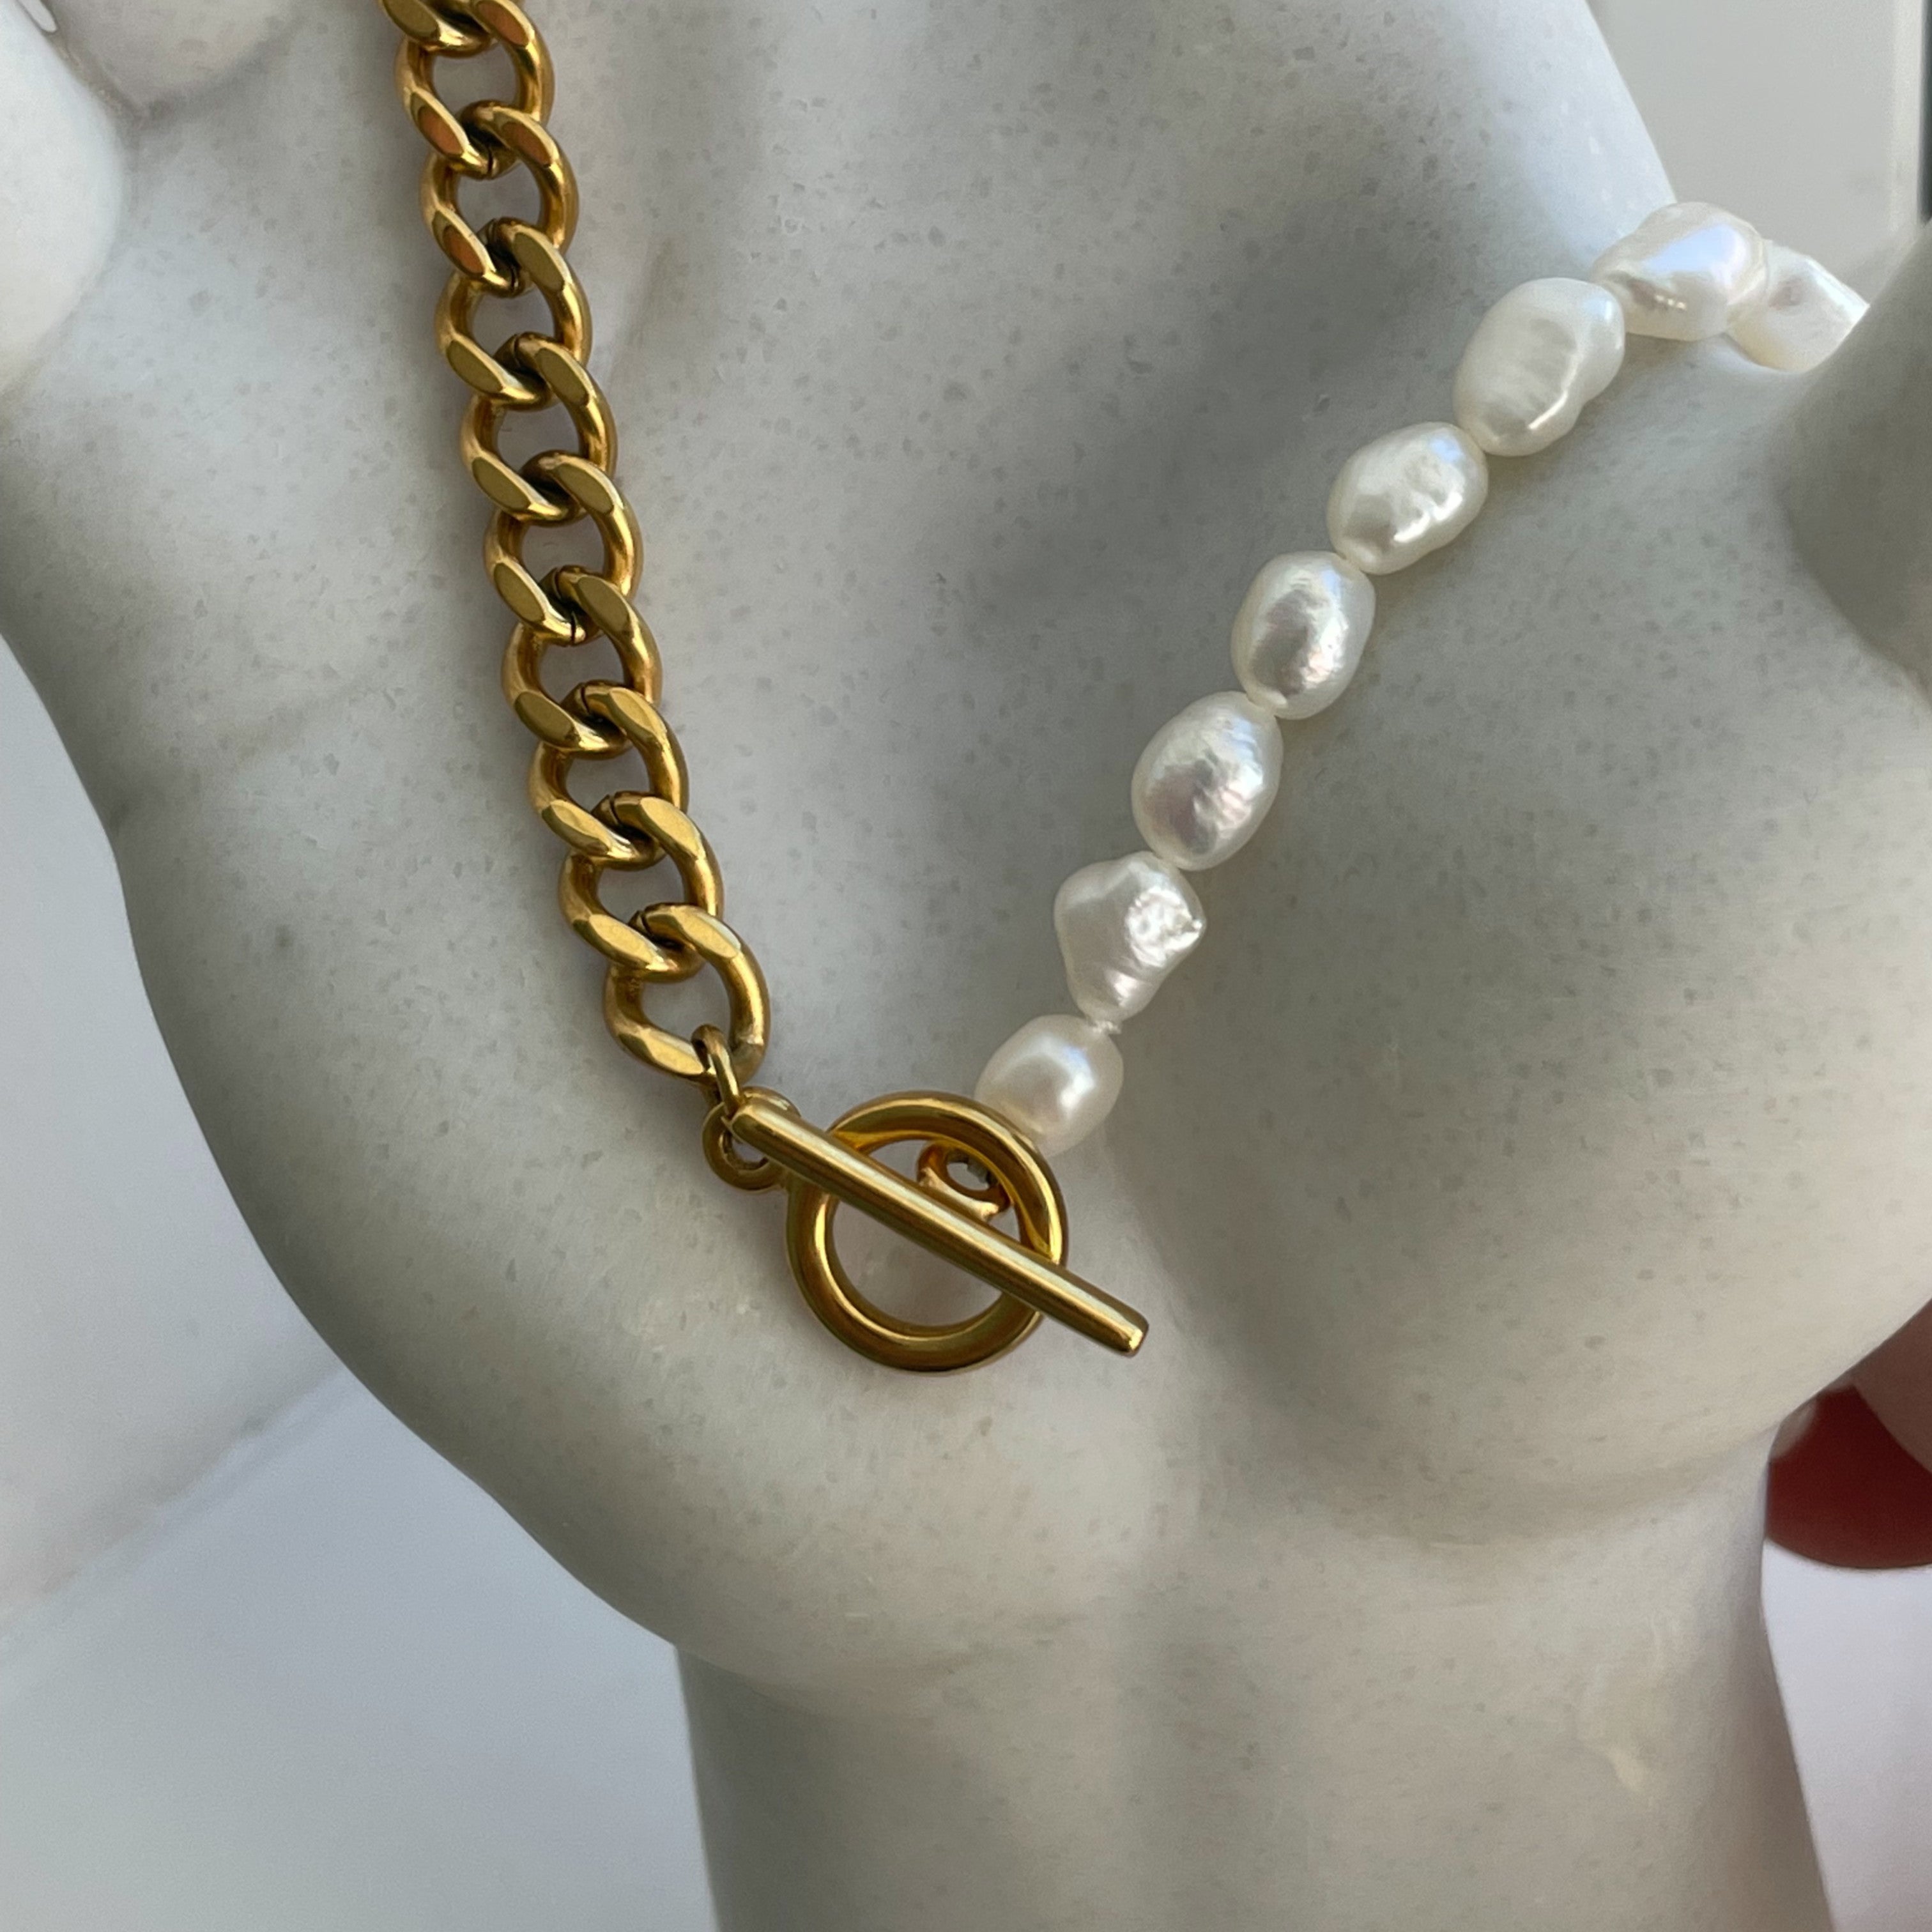 Gold and Pearl Necklace: A versatile addition to your jewellery collection